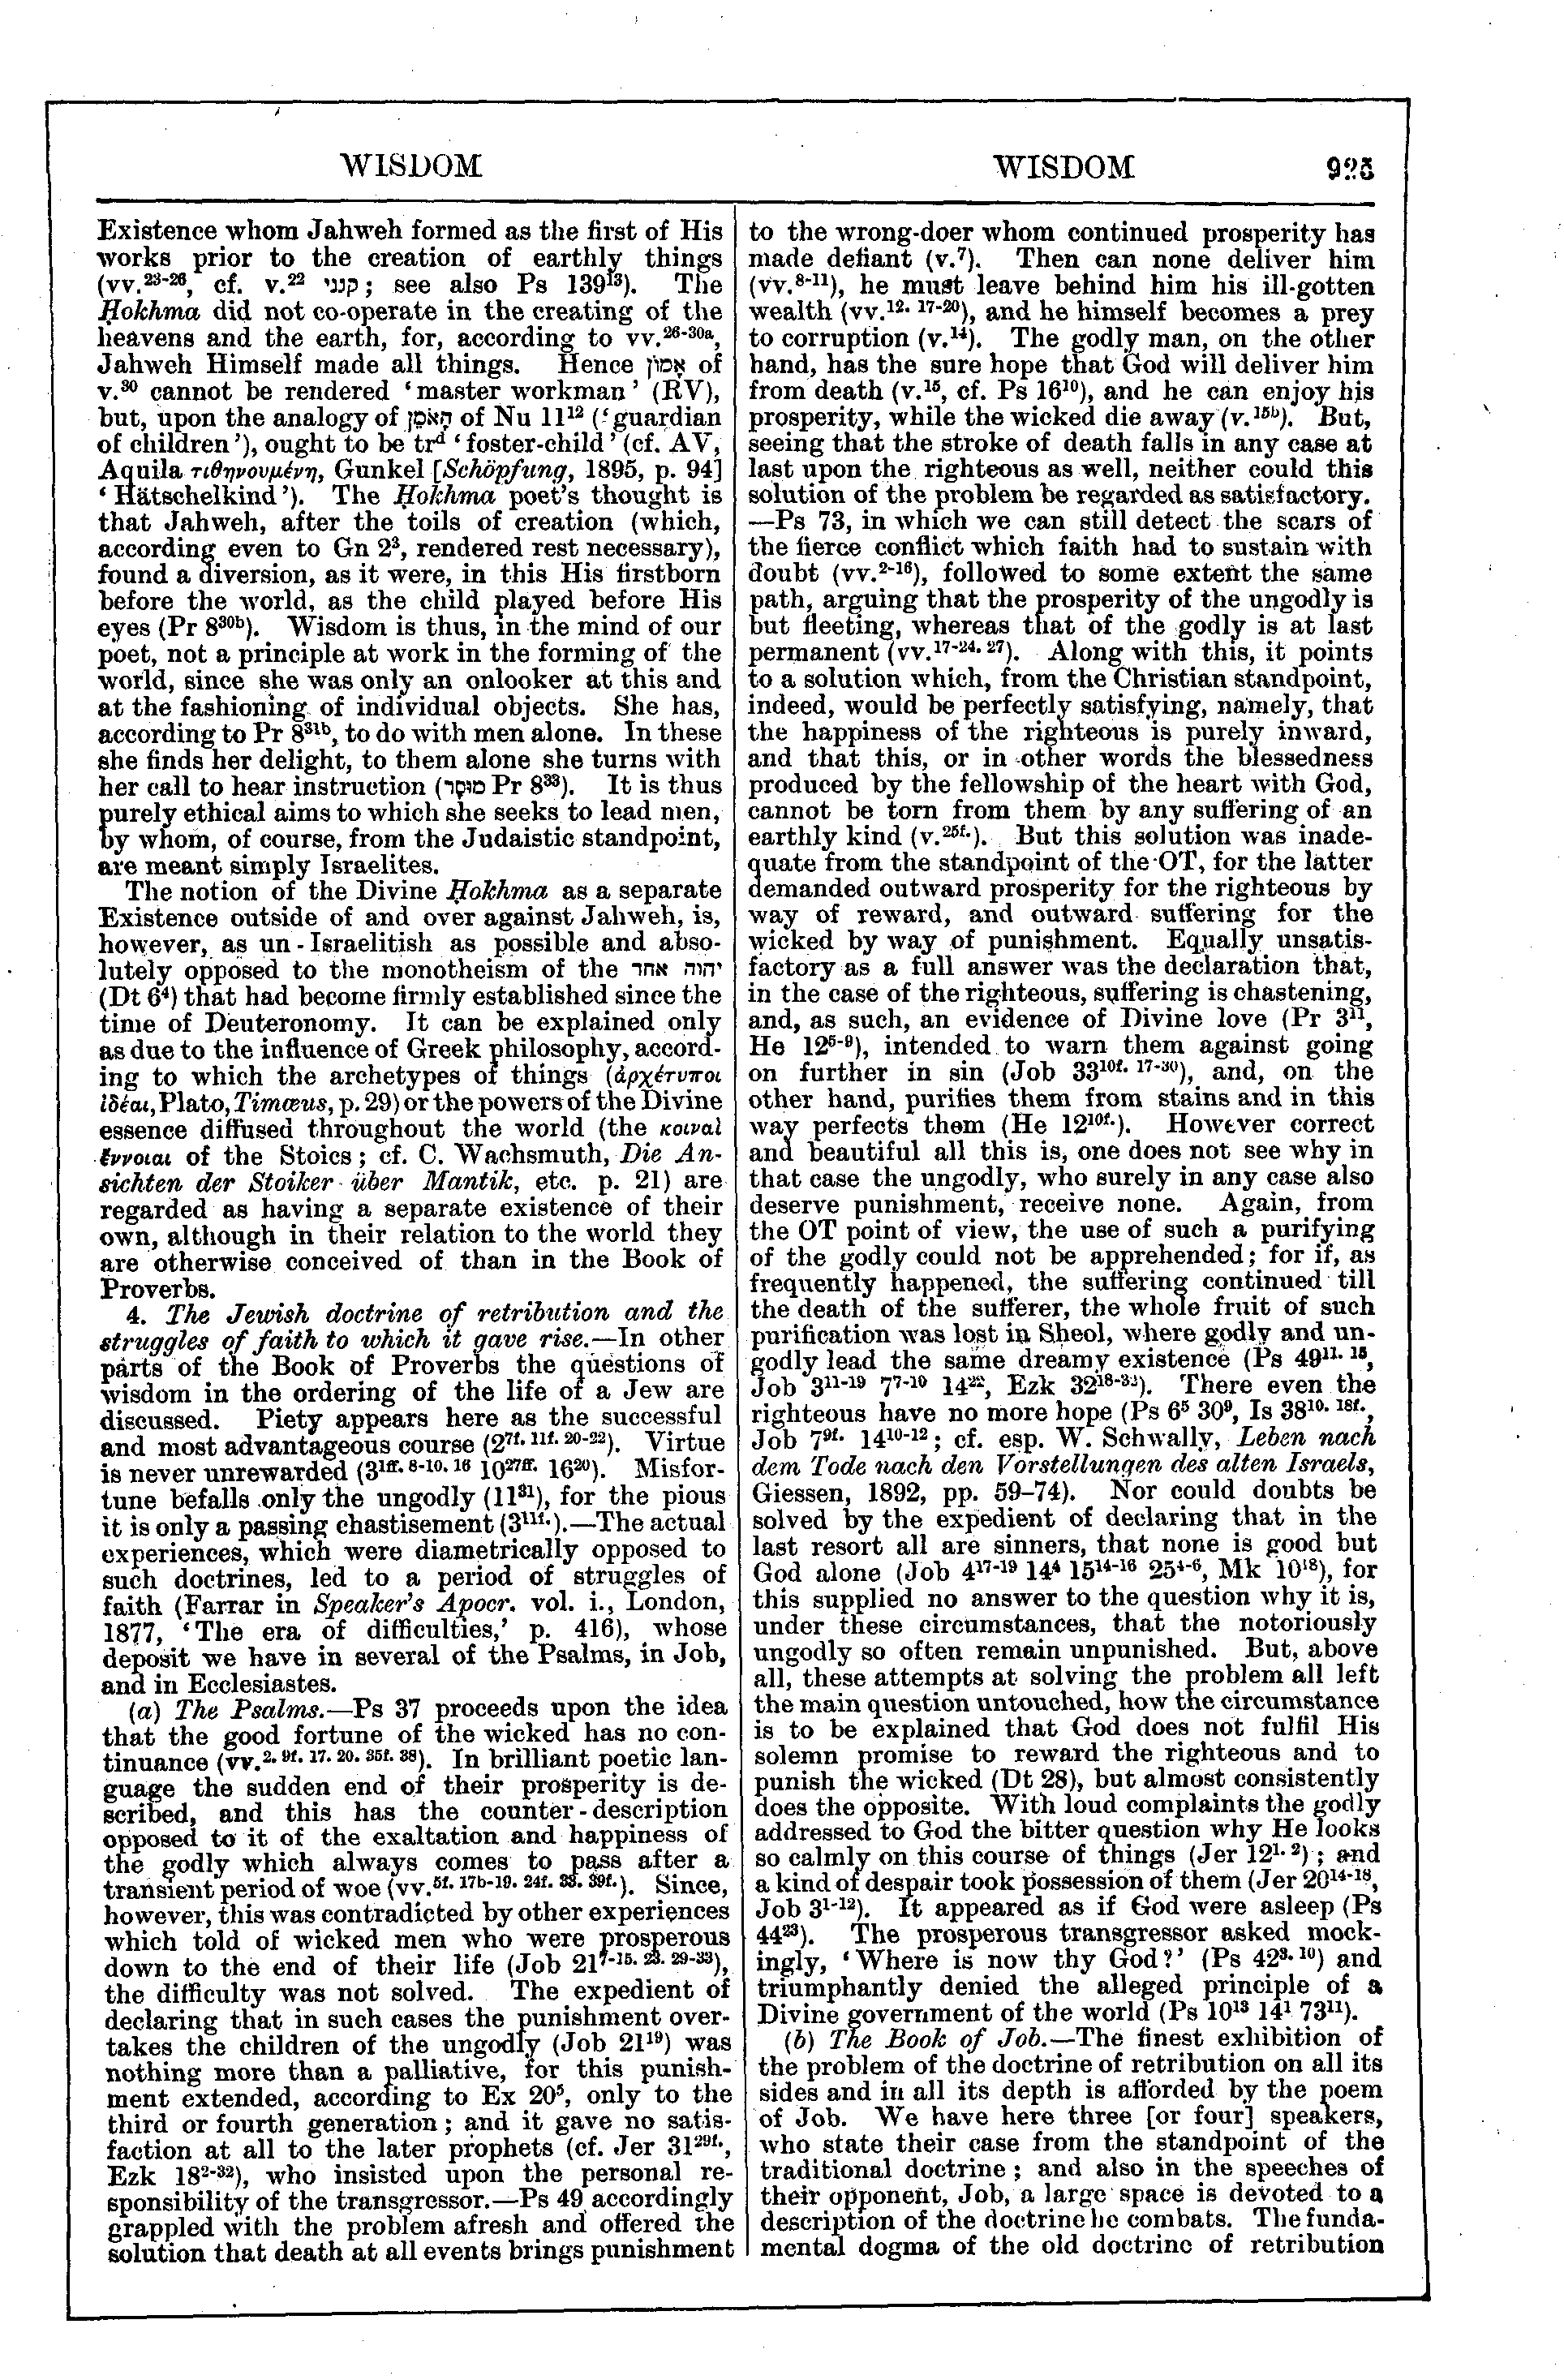 Image of page 925